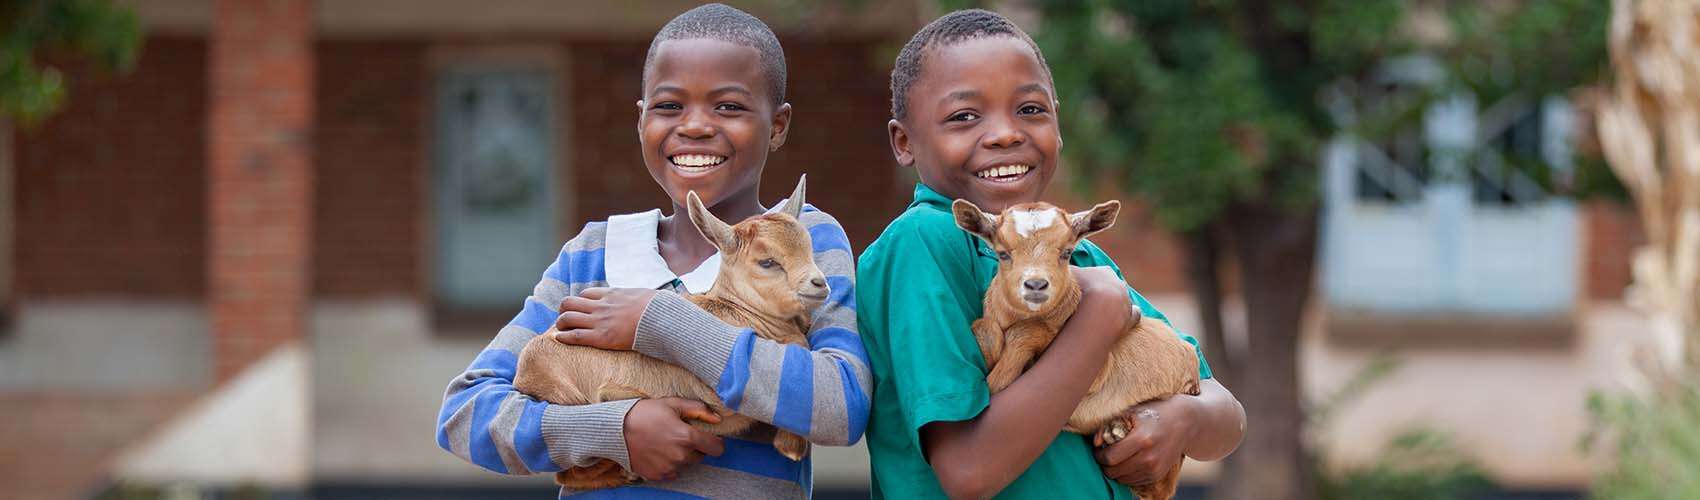 Two children standing holding goats.